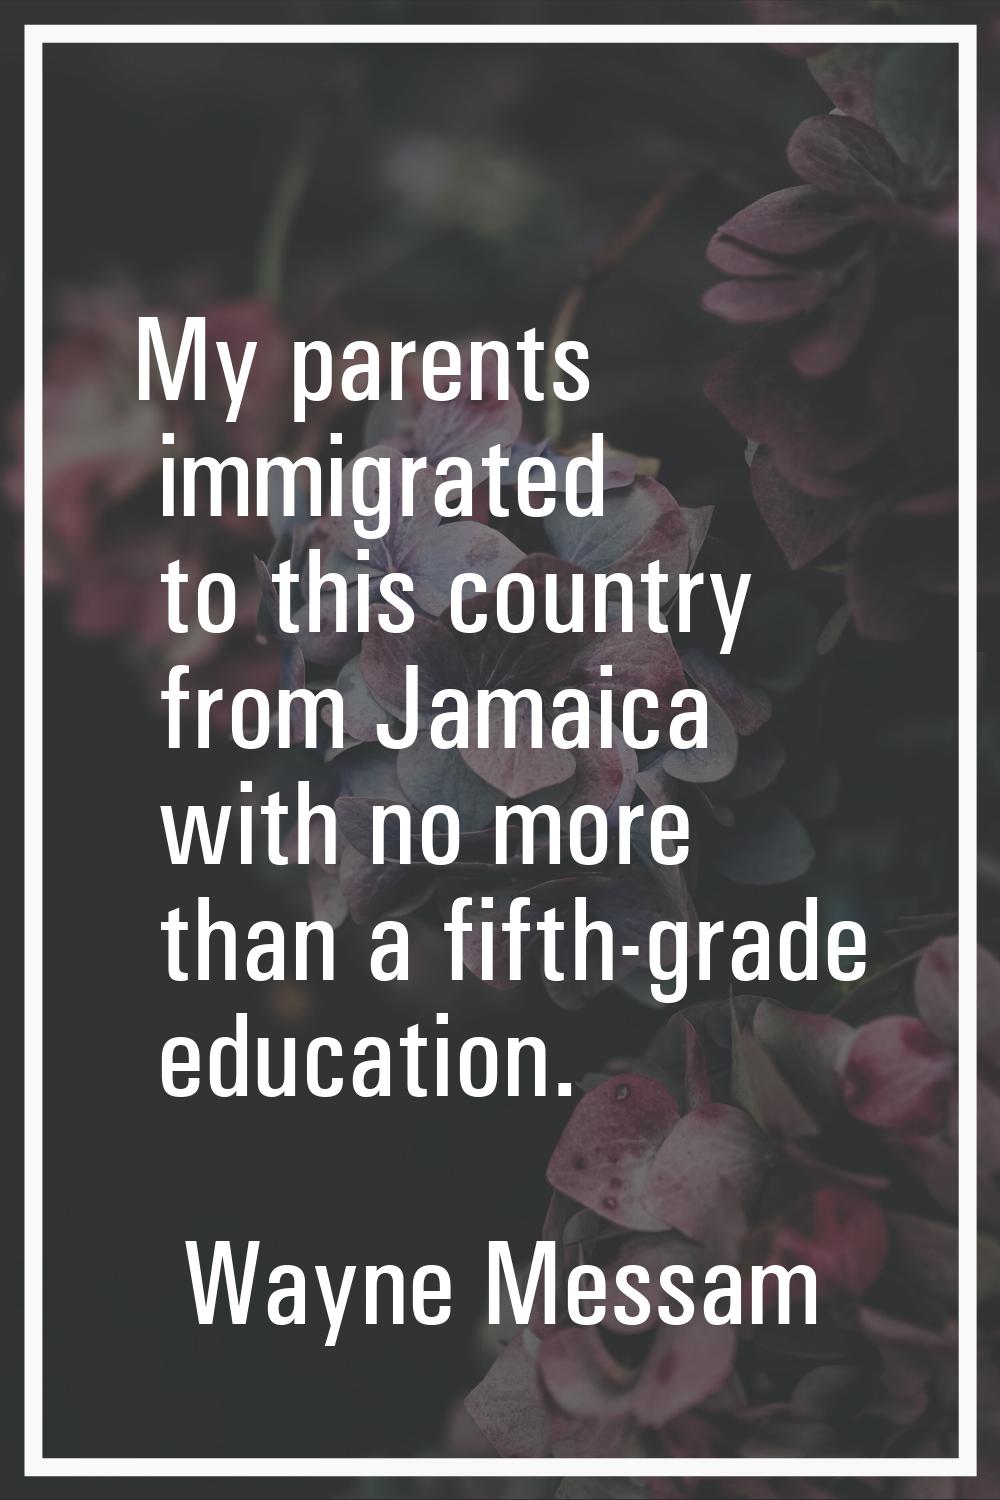 My parents immigrated to this country from Jamaica with no more than a fifth-grade education.